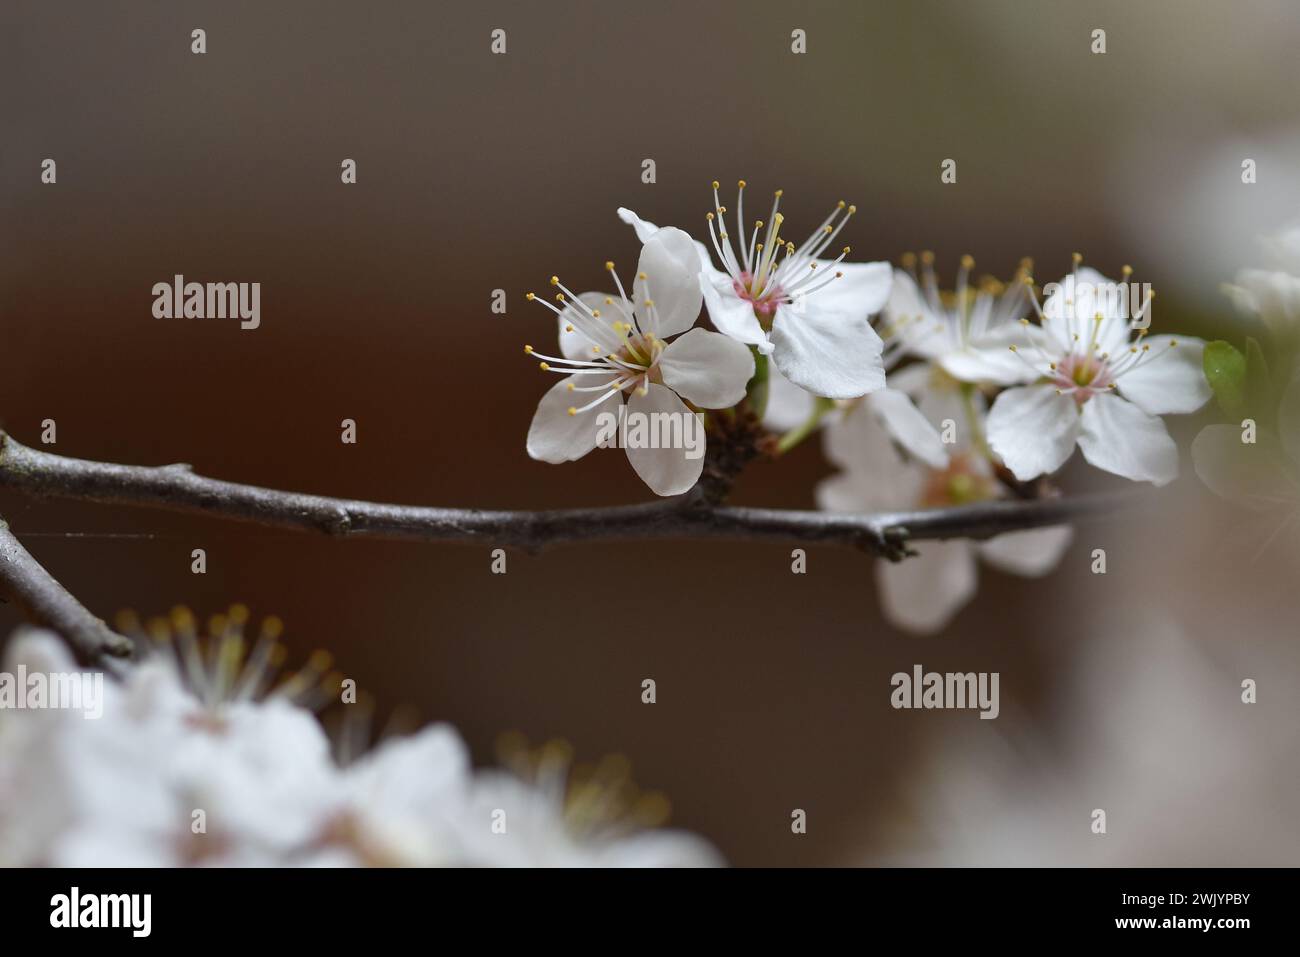 Cherry plum tree to flower in spring. The focus of close up on details of the white flowers with petals and stamens. Concept of hope. Stock Photo